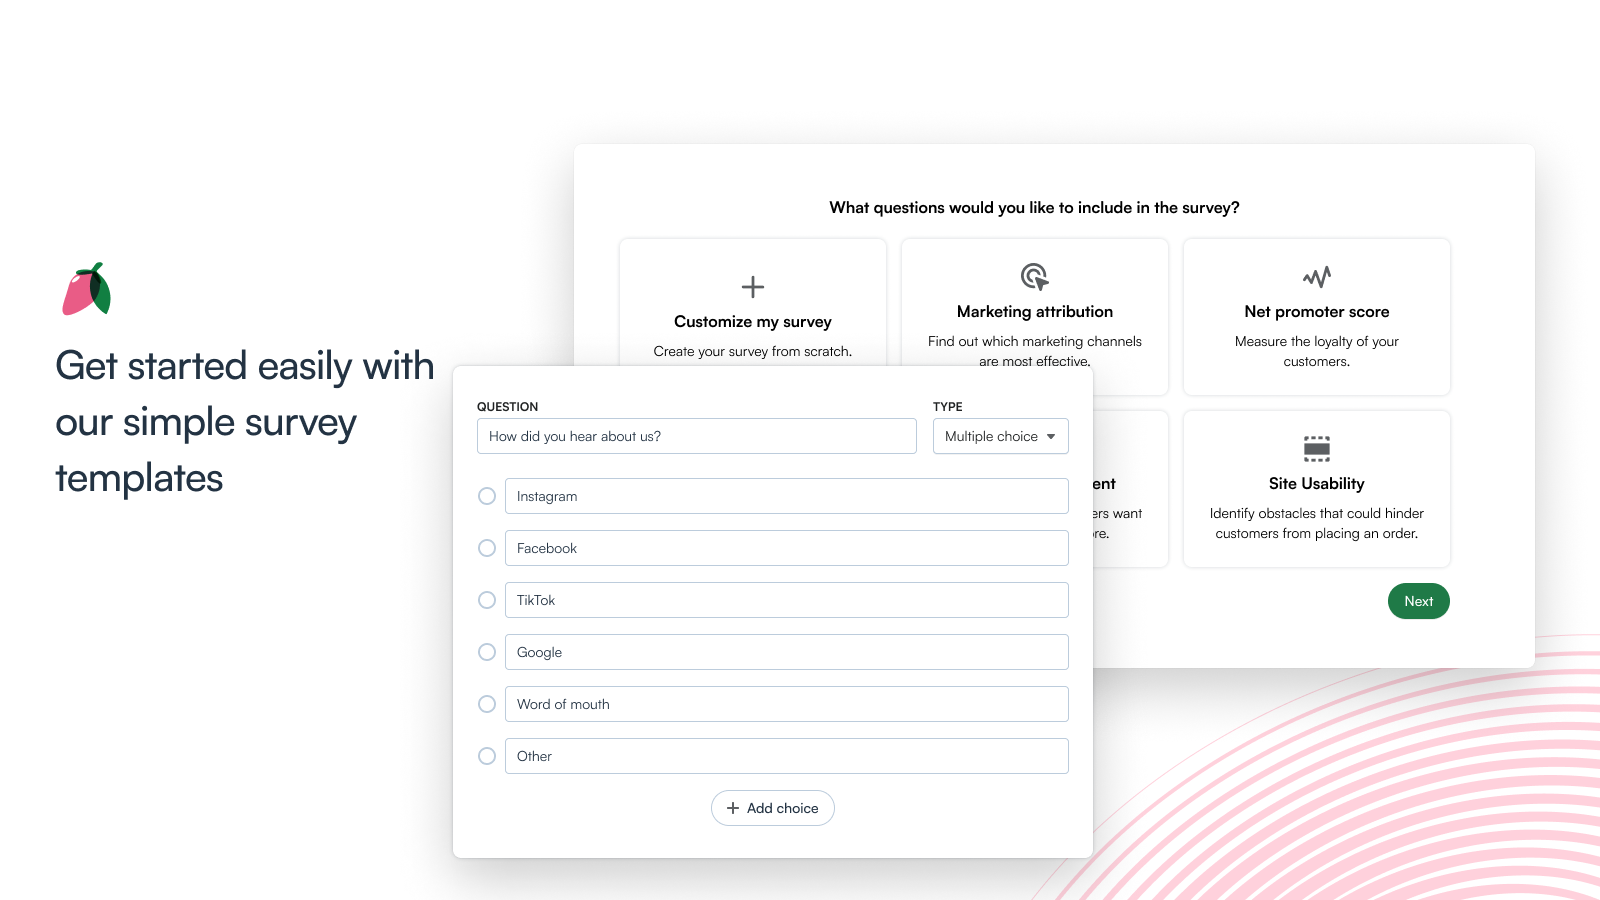 Get started easily with our simple survey templates